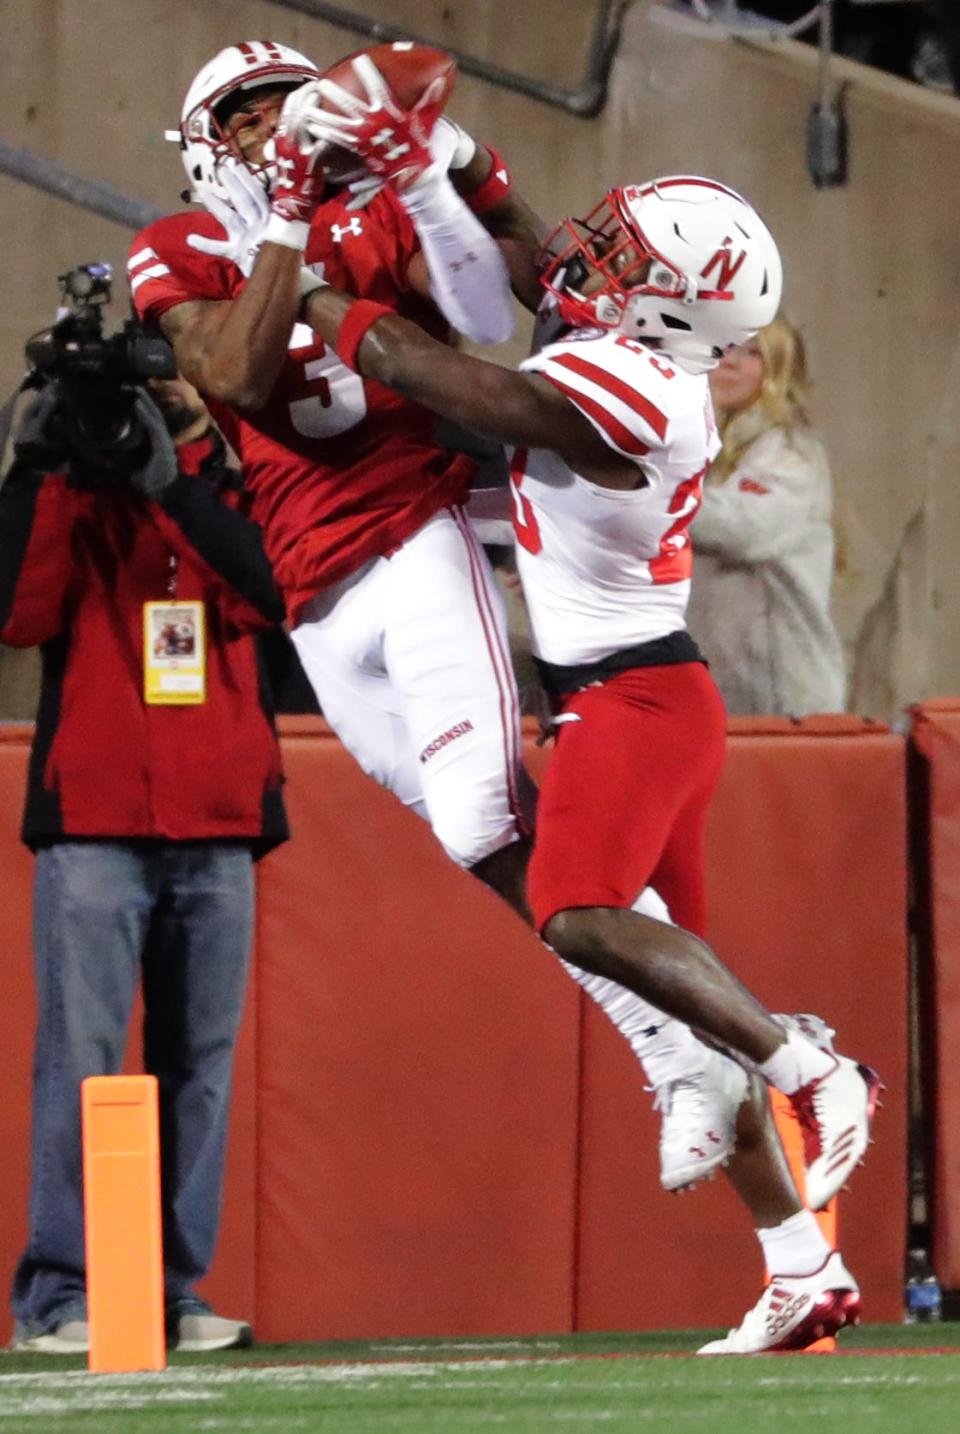 Wisconsin wide receiver Kendric Pryor is unable to stay in bounds while making a catch against Nebraska cornerback Dicaprio Bootle during the first quarter Saturday night.